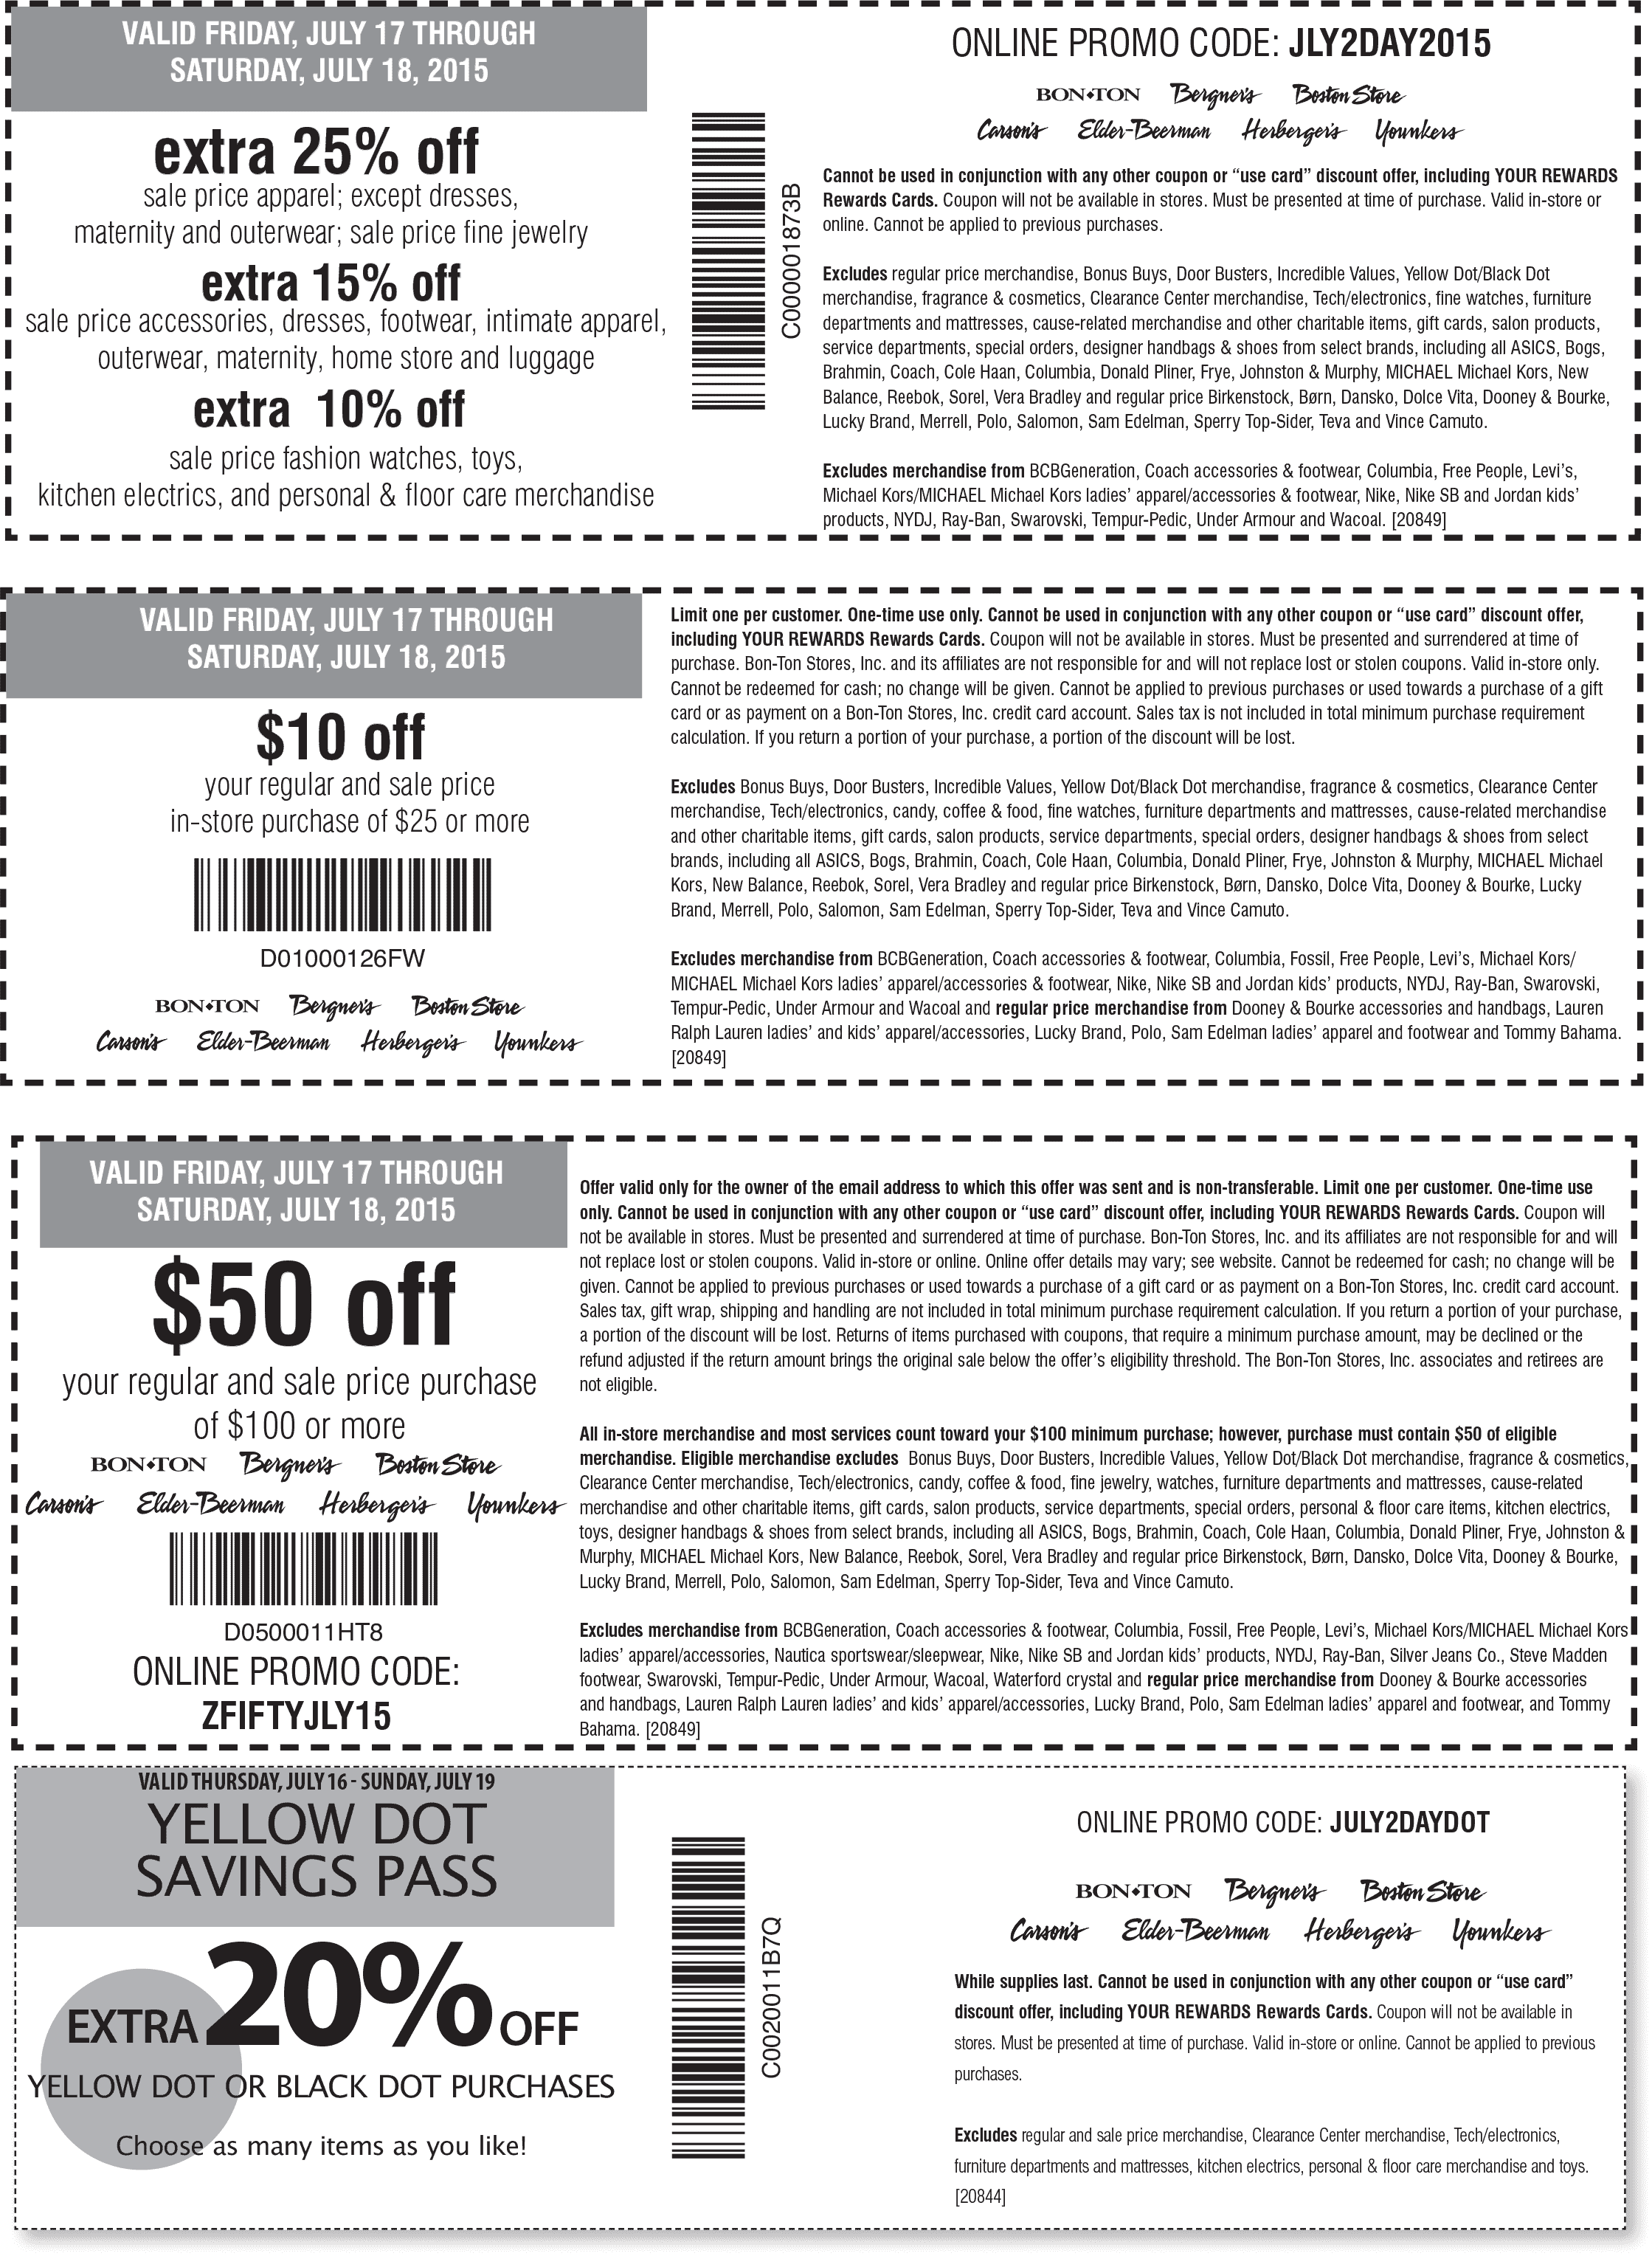 Carsons Coupon March 2024 $50 off $100 & more today at Carsons, Bon Ton & sister stores, or online via promo code ZFIFTYJLY15